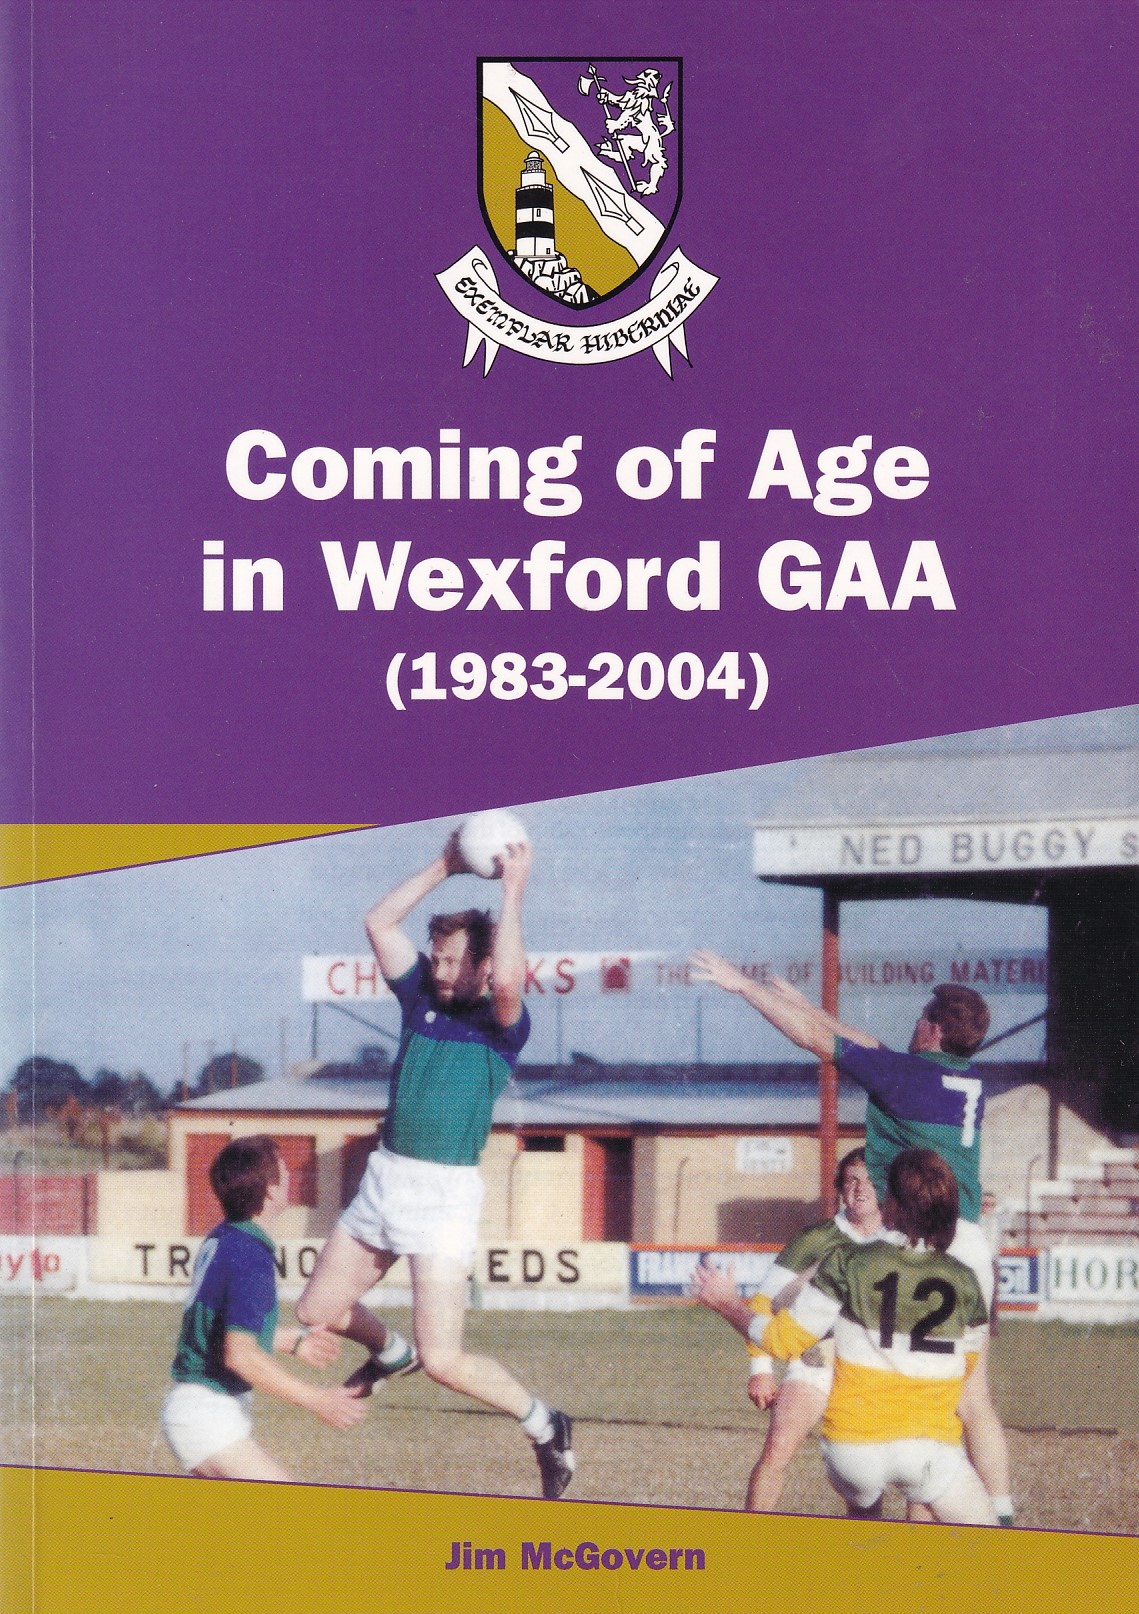 Coming of Age in Wexford G.A.A. (1983-2004) | McGovern, James | Charlie Byrne's